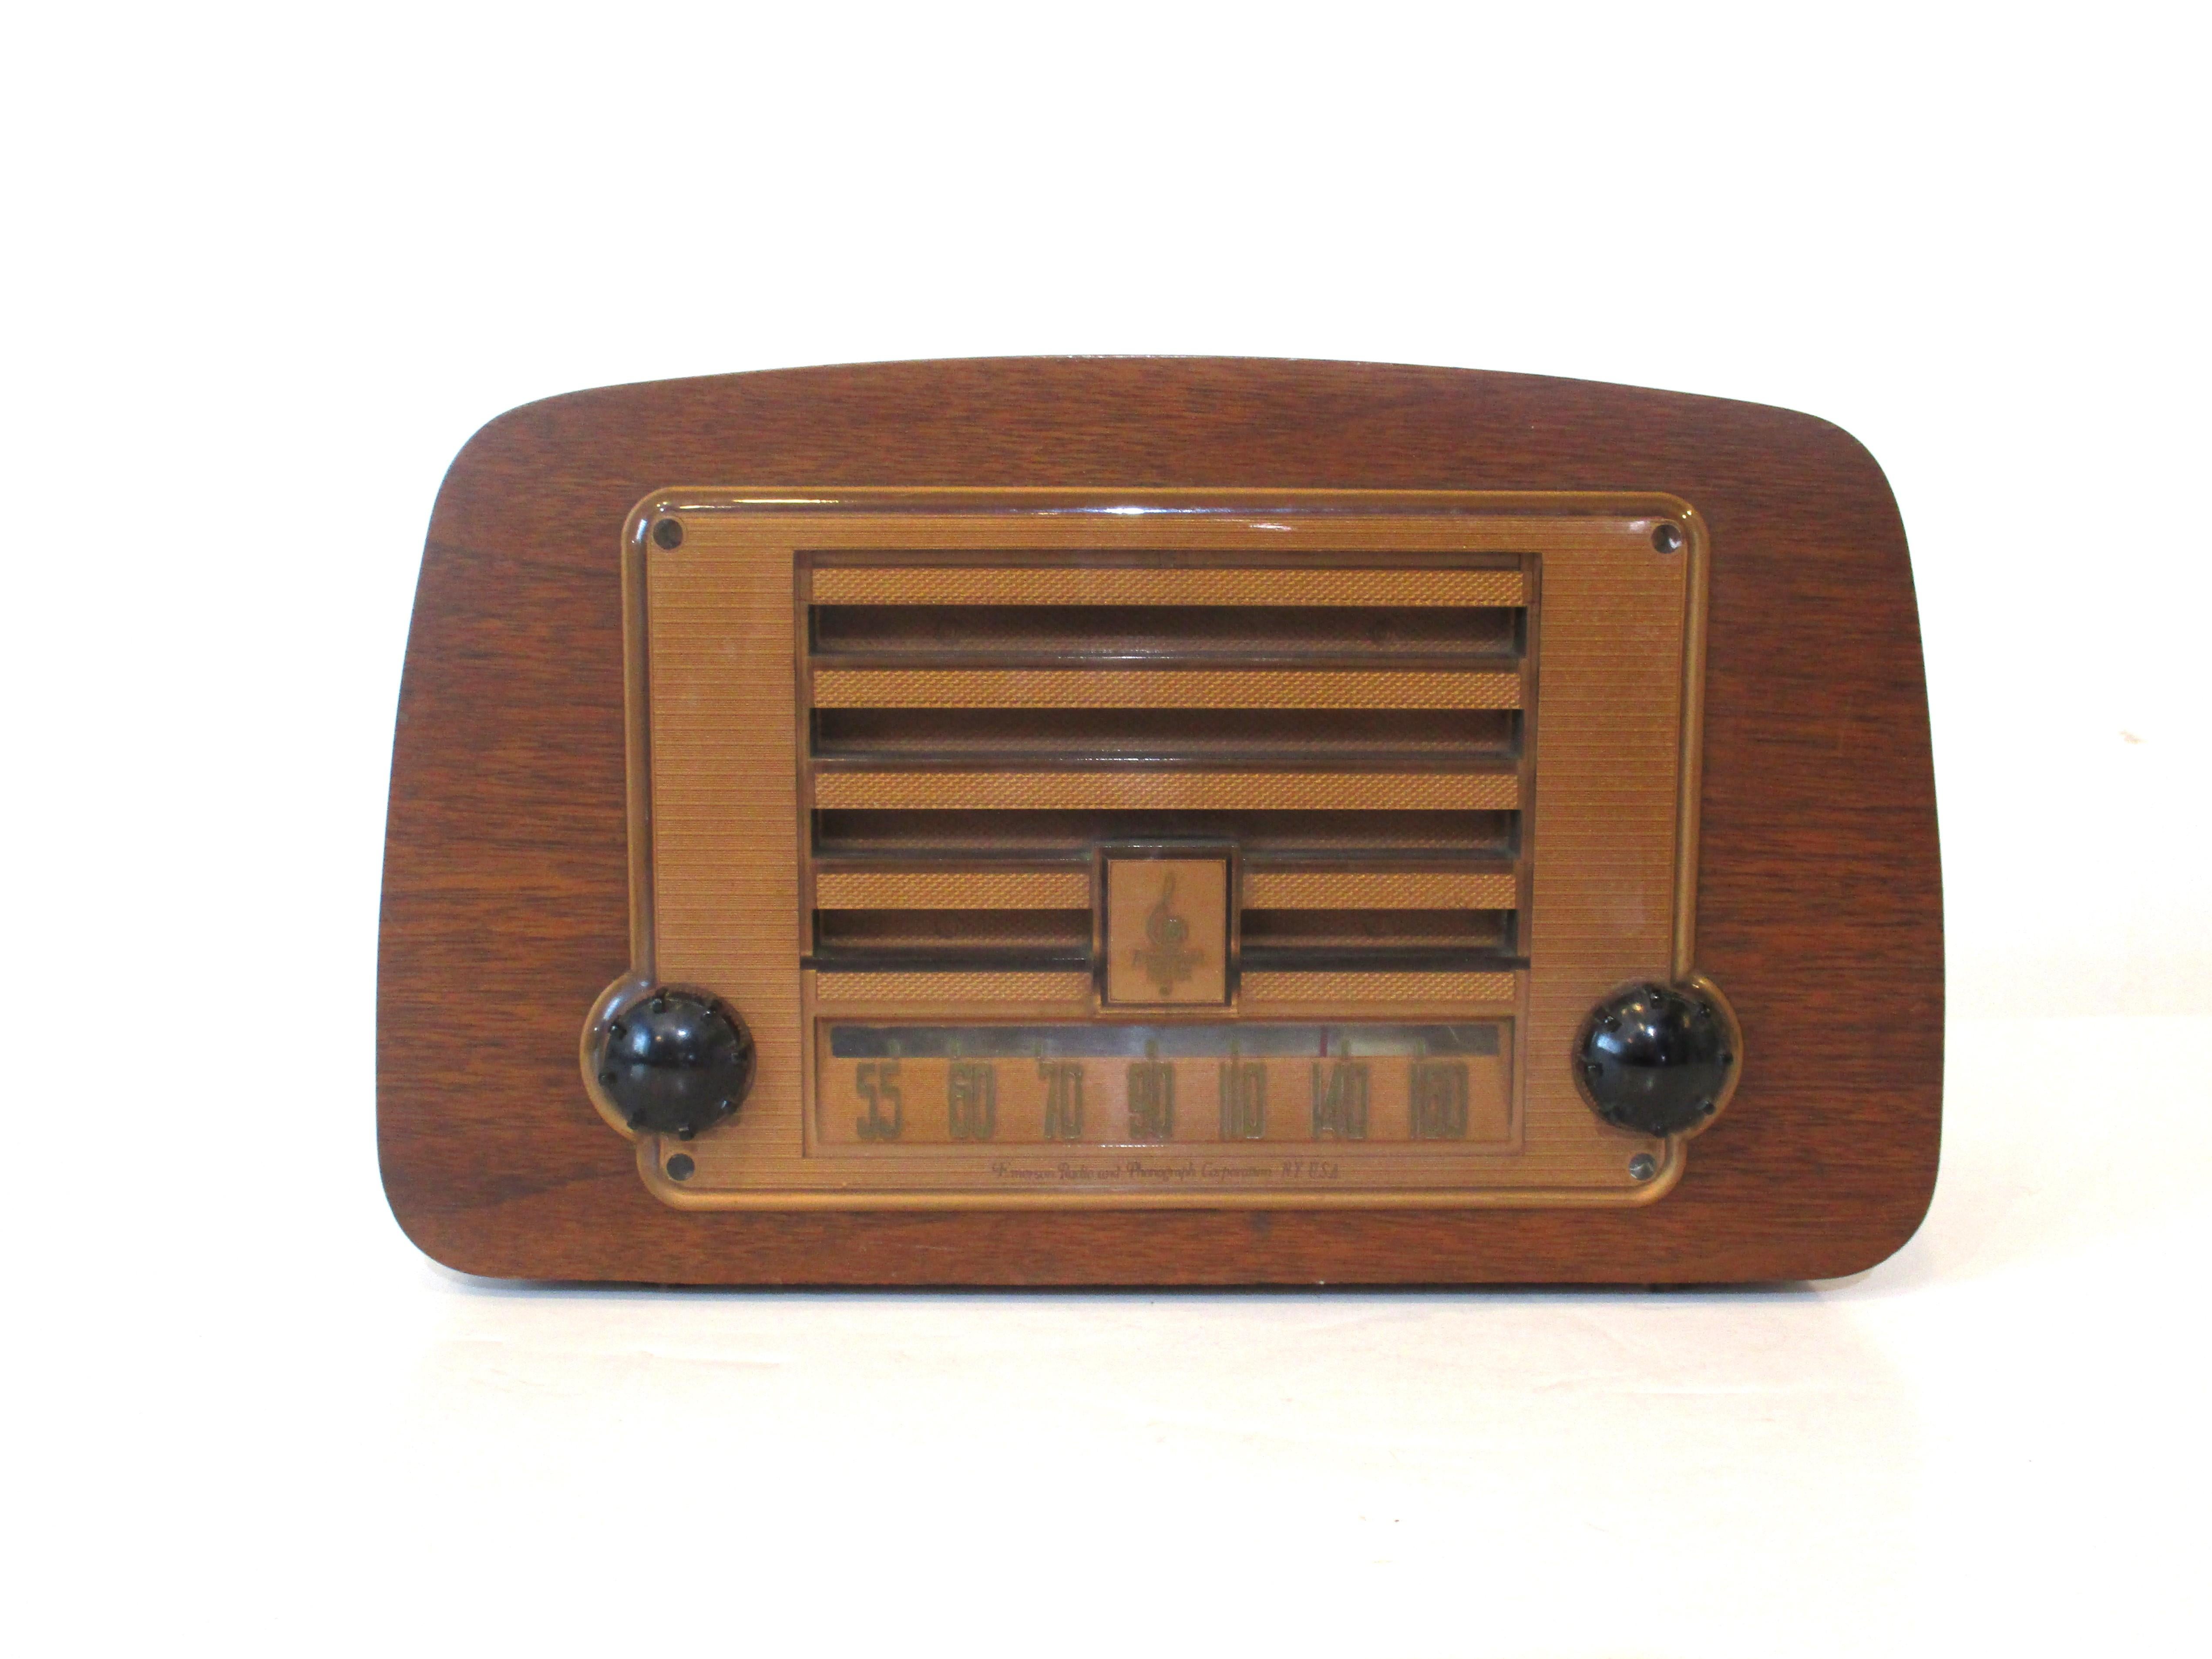 20th Century Eames Designed Radio by Emerson and Evans Products, 1946